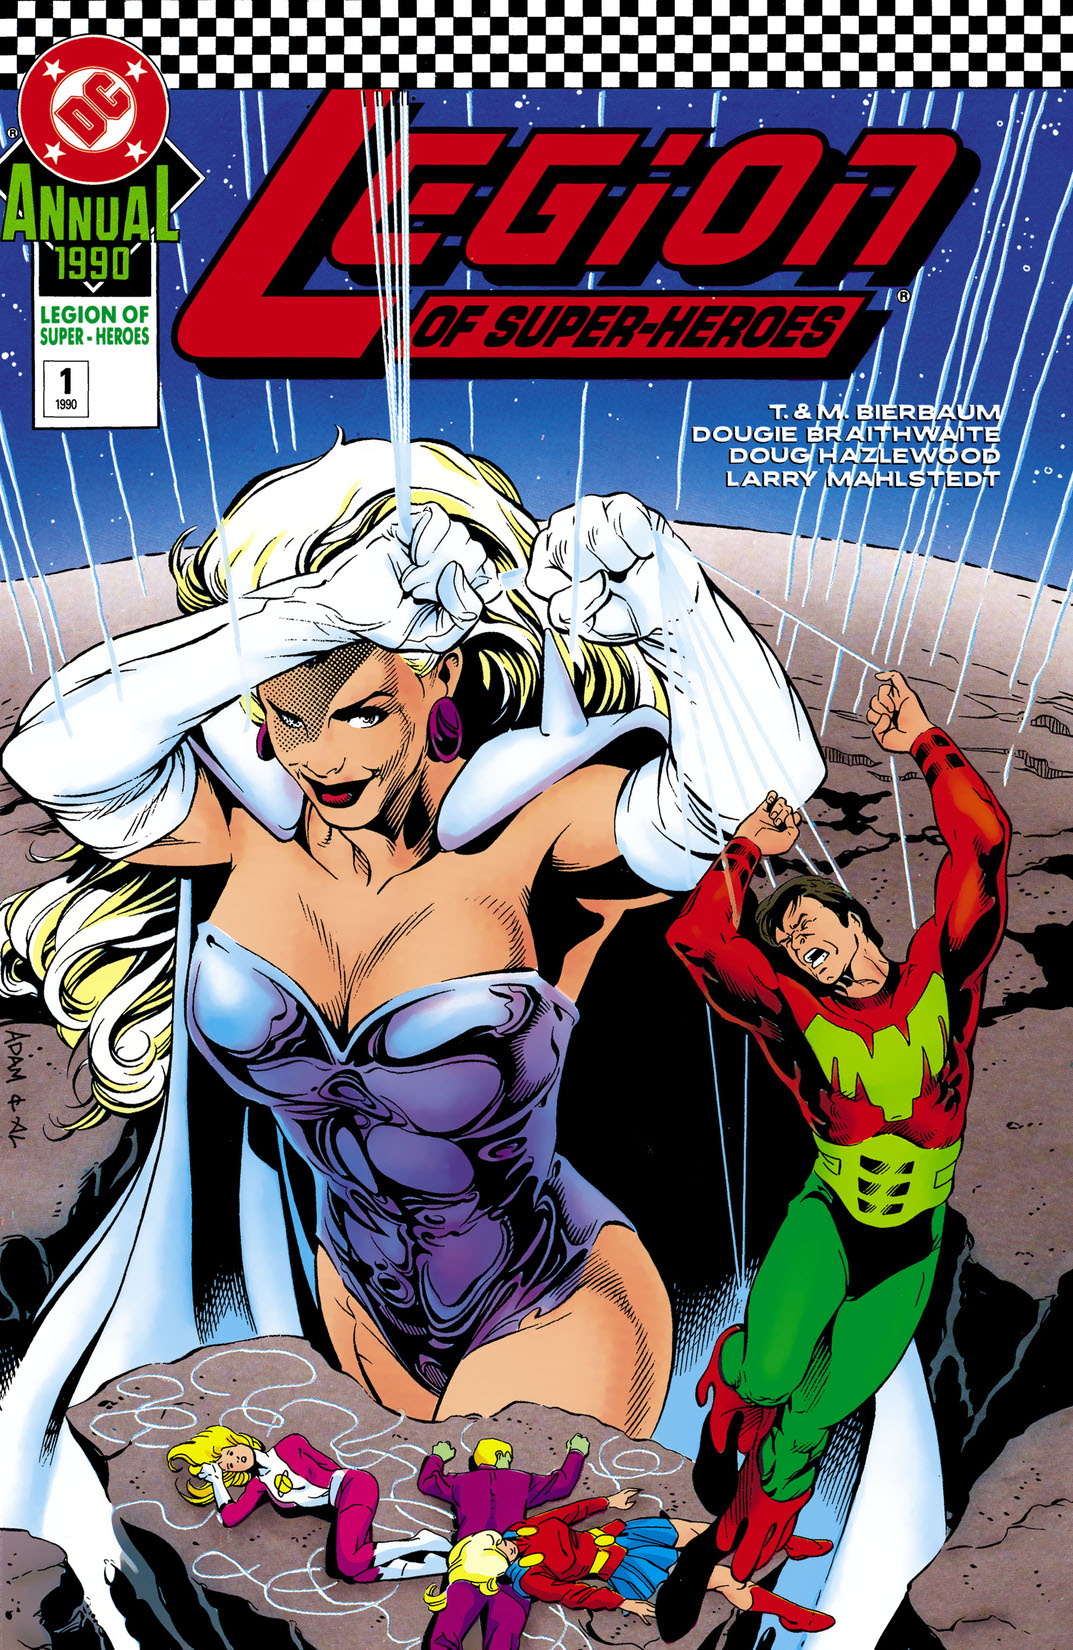 Legion of Super-Heroes Annual (1990-1996) #1 preview images